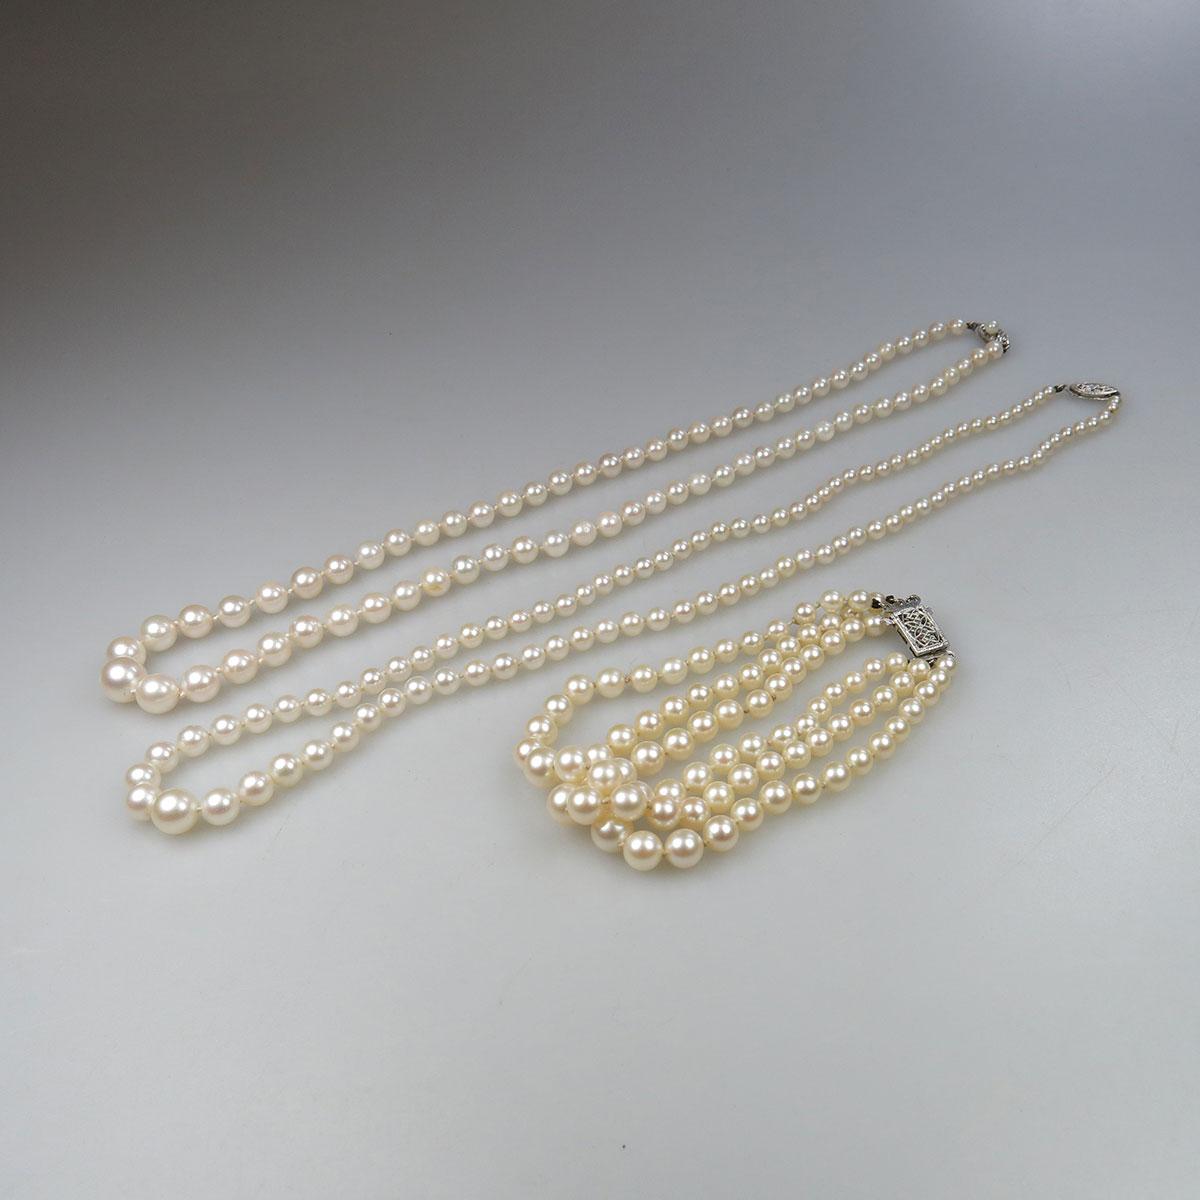 2 Single Strand Graduated Cultured Pearl Necklaces